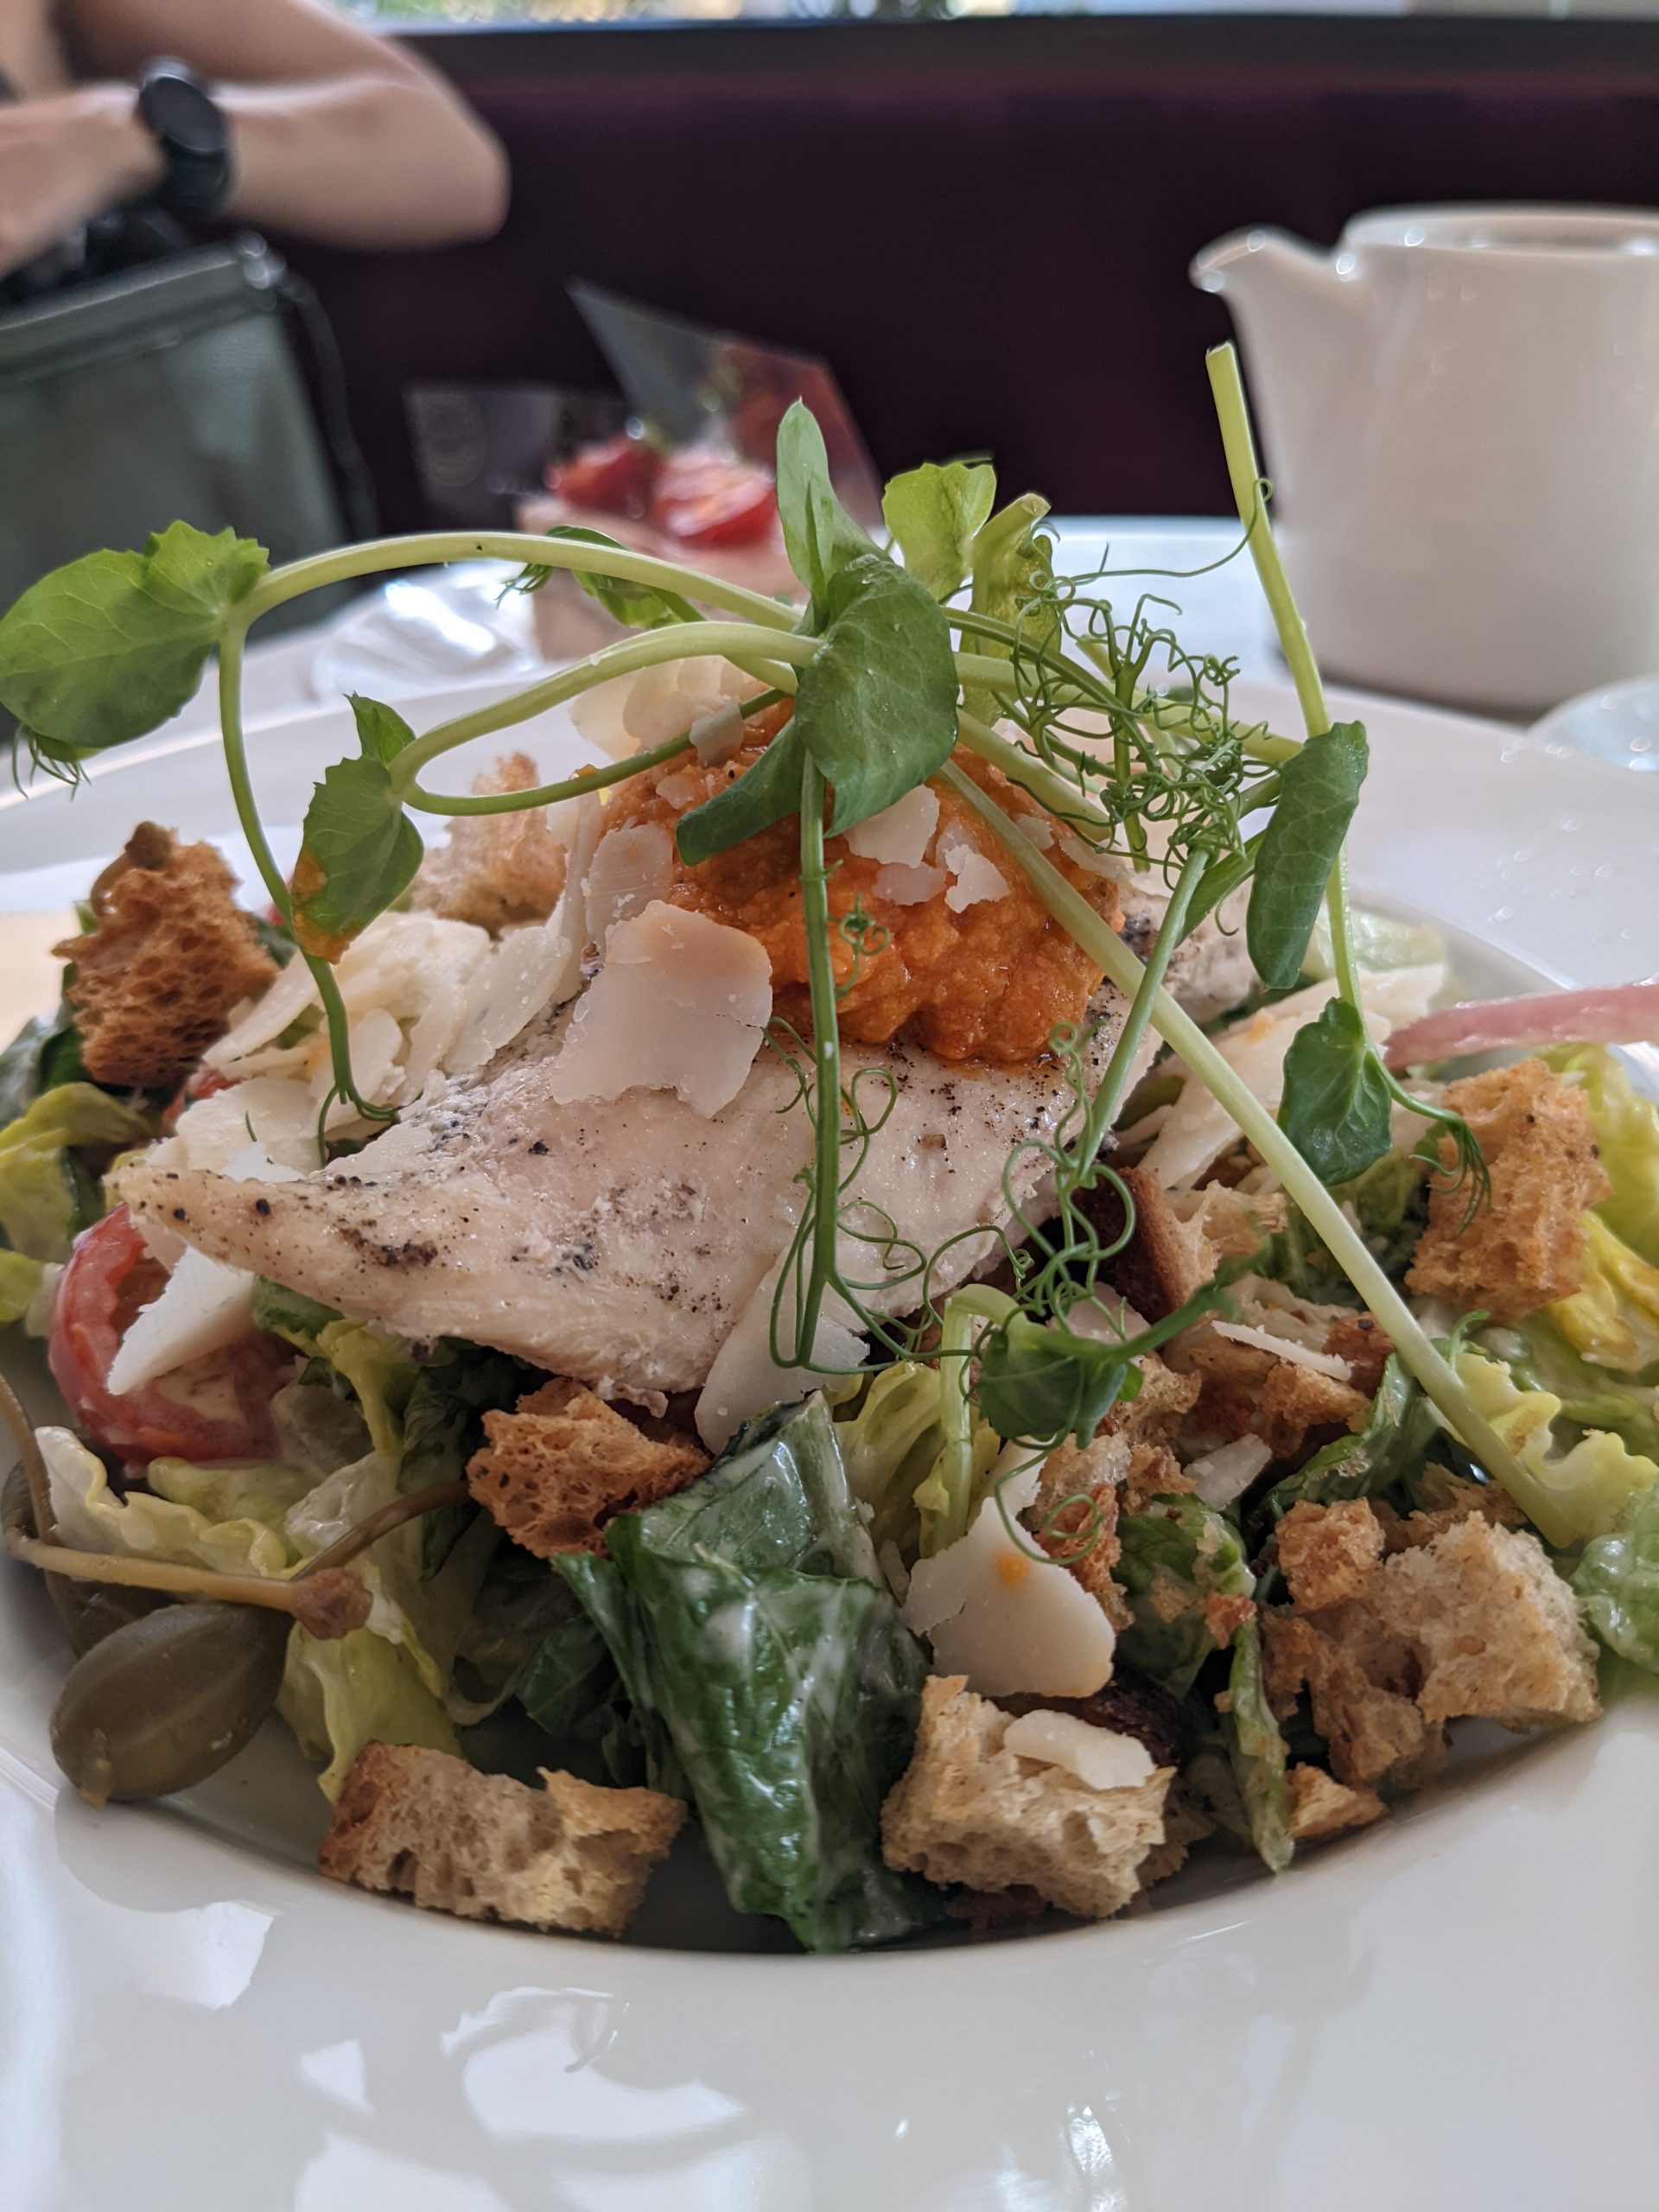 A salad sitting on a plate